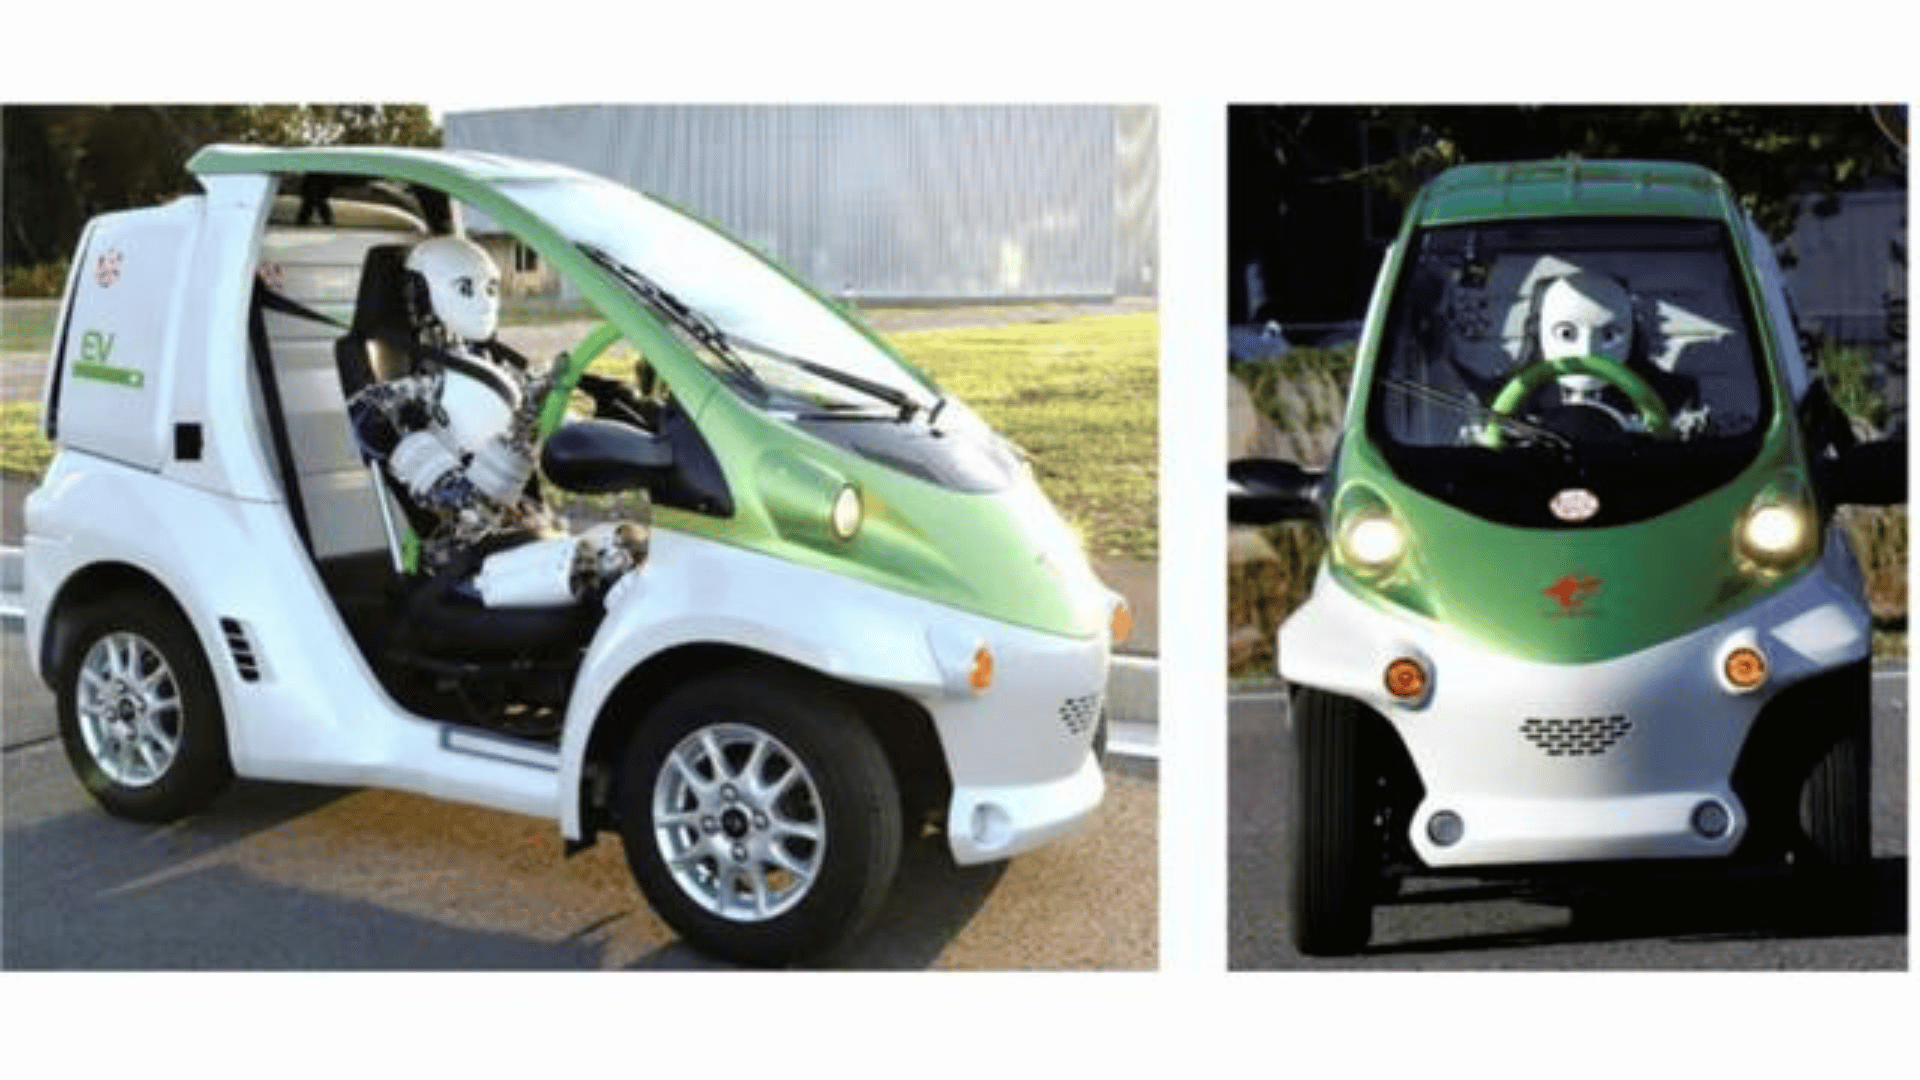 The team's musculoskeletal humanoid being tested in a Toyota COMS electric car. University of Tokyo